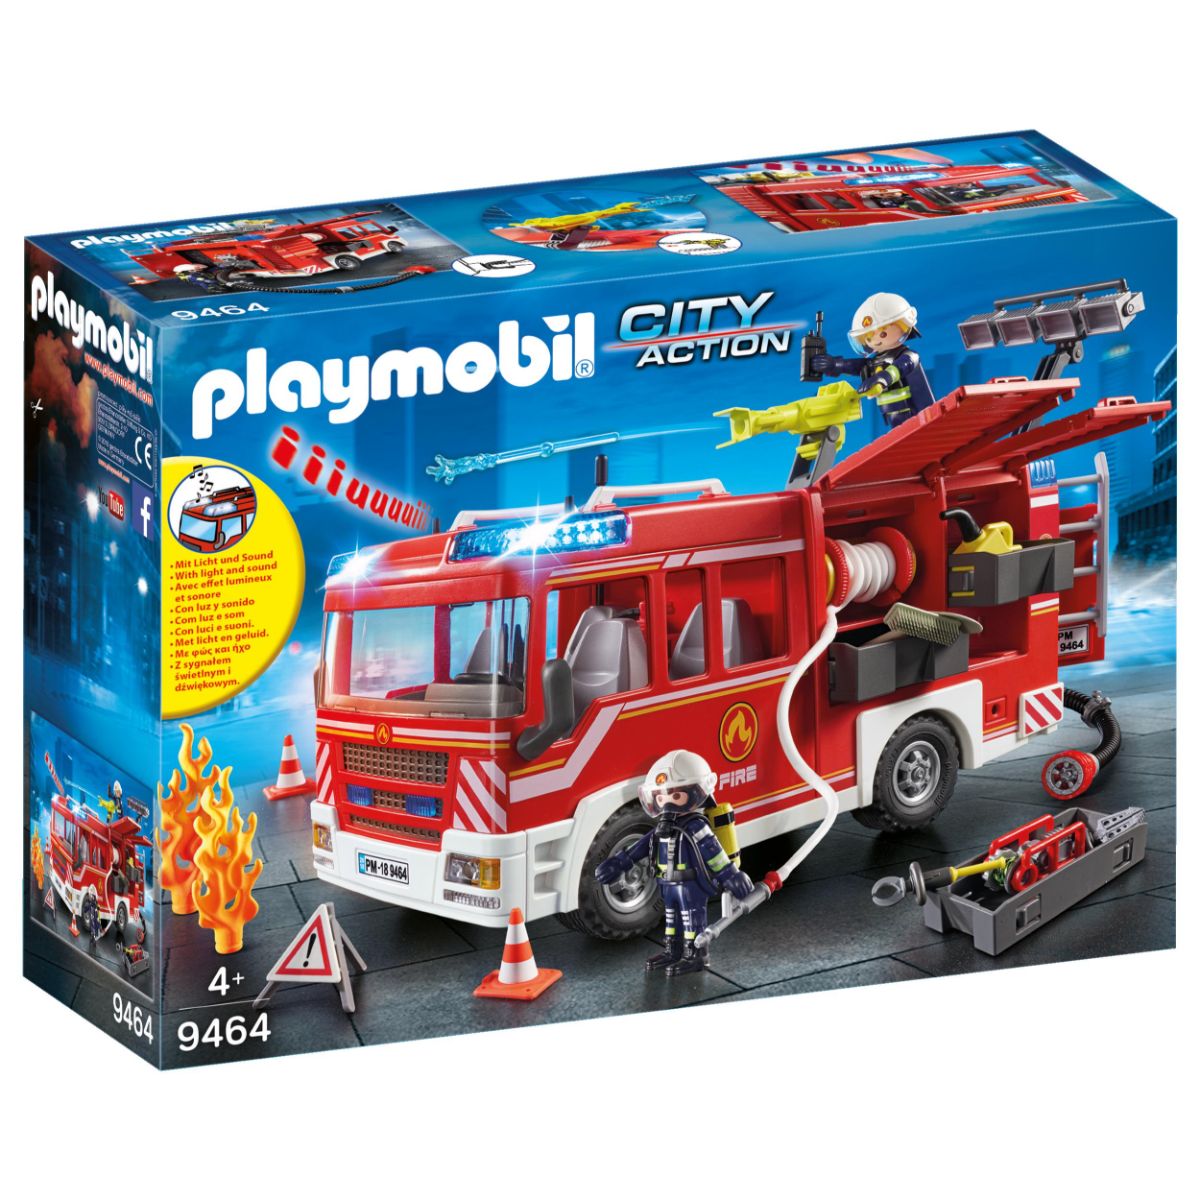 PLAYMOBIL 9464 CITY ACTION - FIRE ENGINE